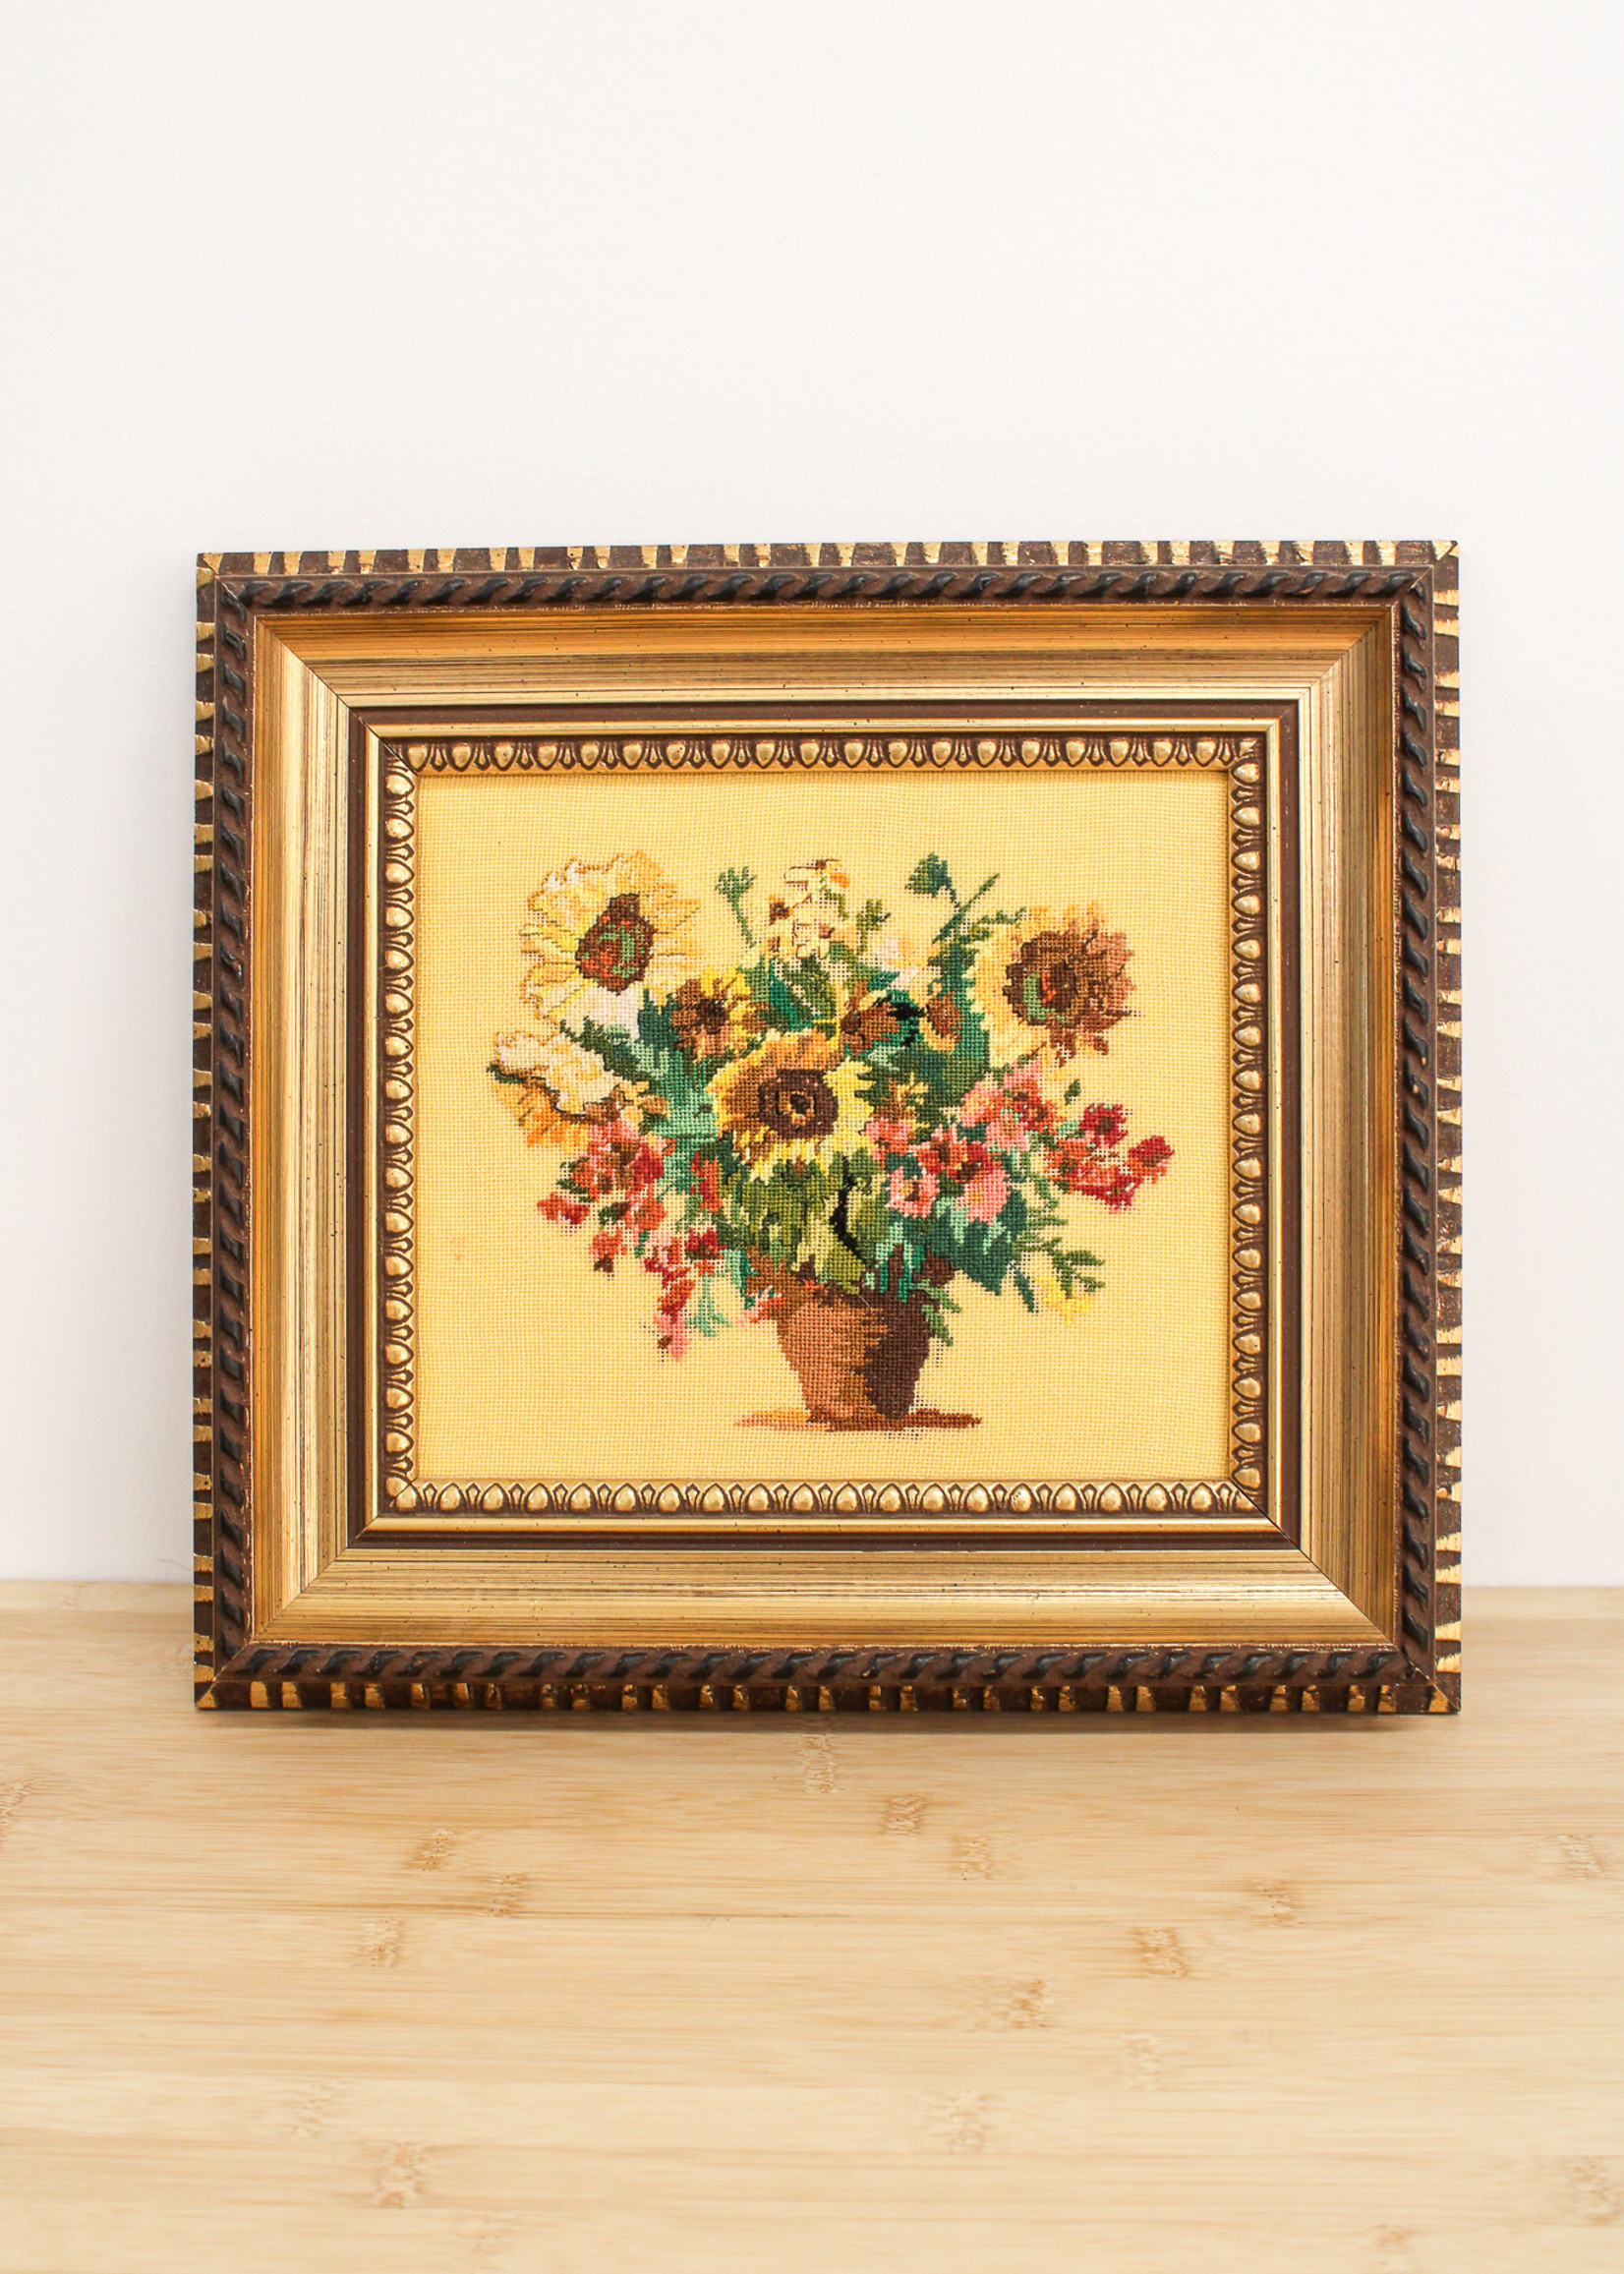 ART -  Vintage Embroidery, Cross Stitching Bouquet of Flowers with Sunflowers, framed